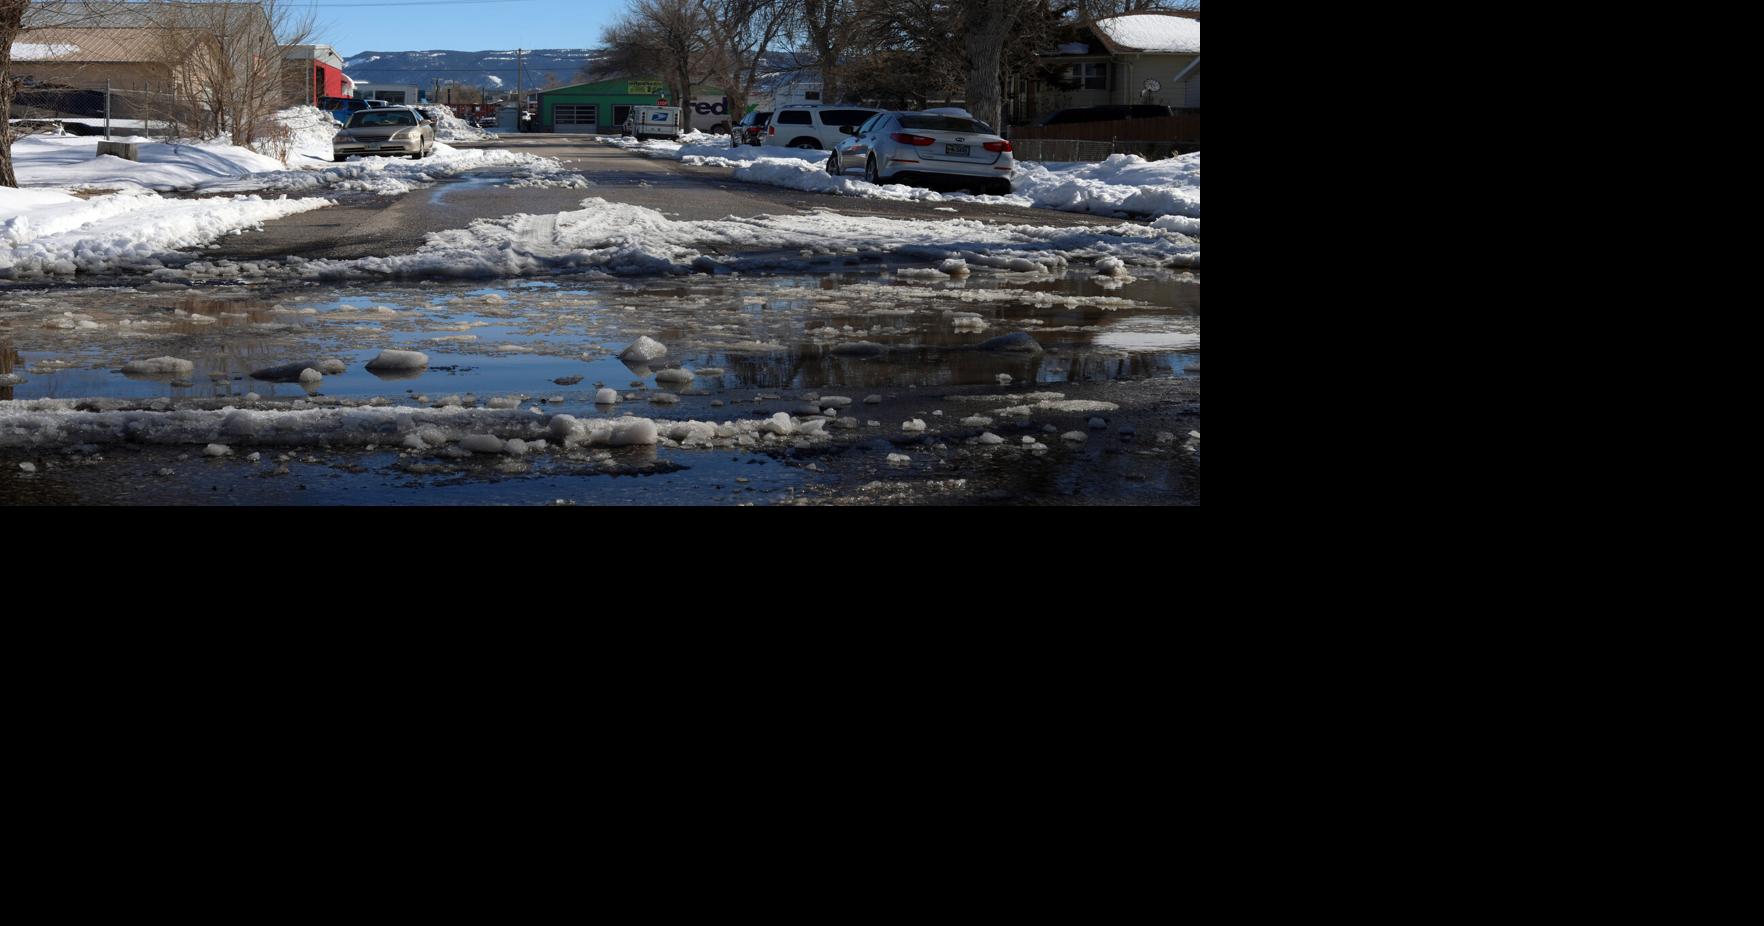 Flooding expected in parts of Wyoming as temperatures rise in snowstorm’s wake